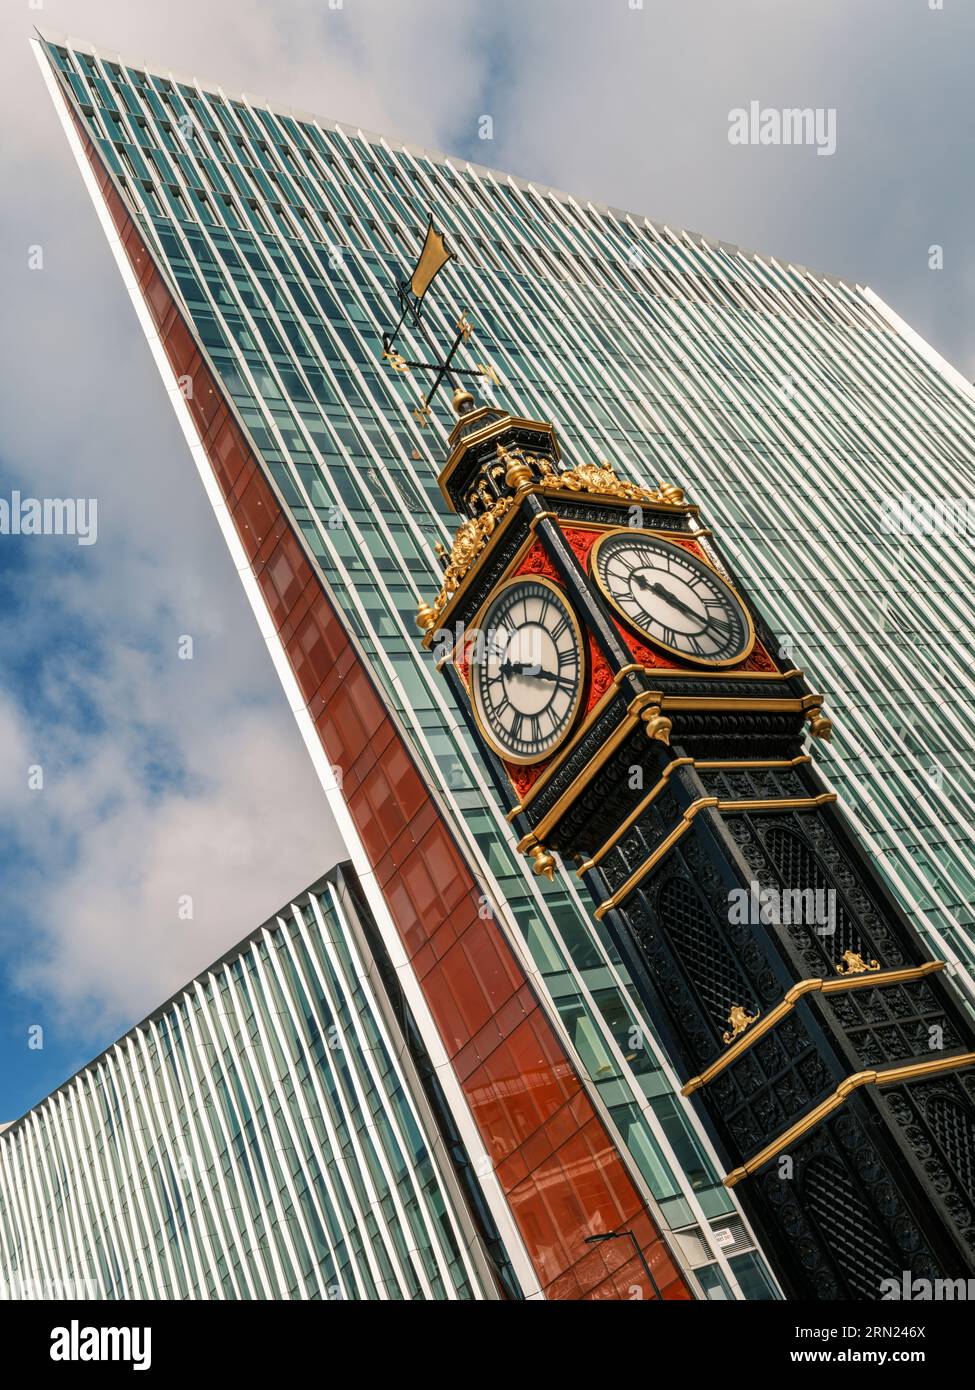 Westminster, Central London, England. 'Little Ben' is a cast iron minature clock tower situated opposite the Victoria Palace theatre at the intersecti Stock Photo